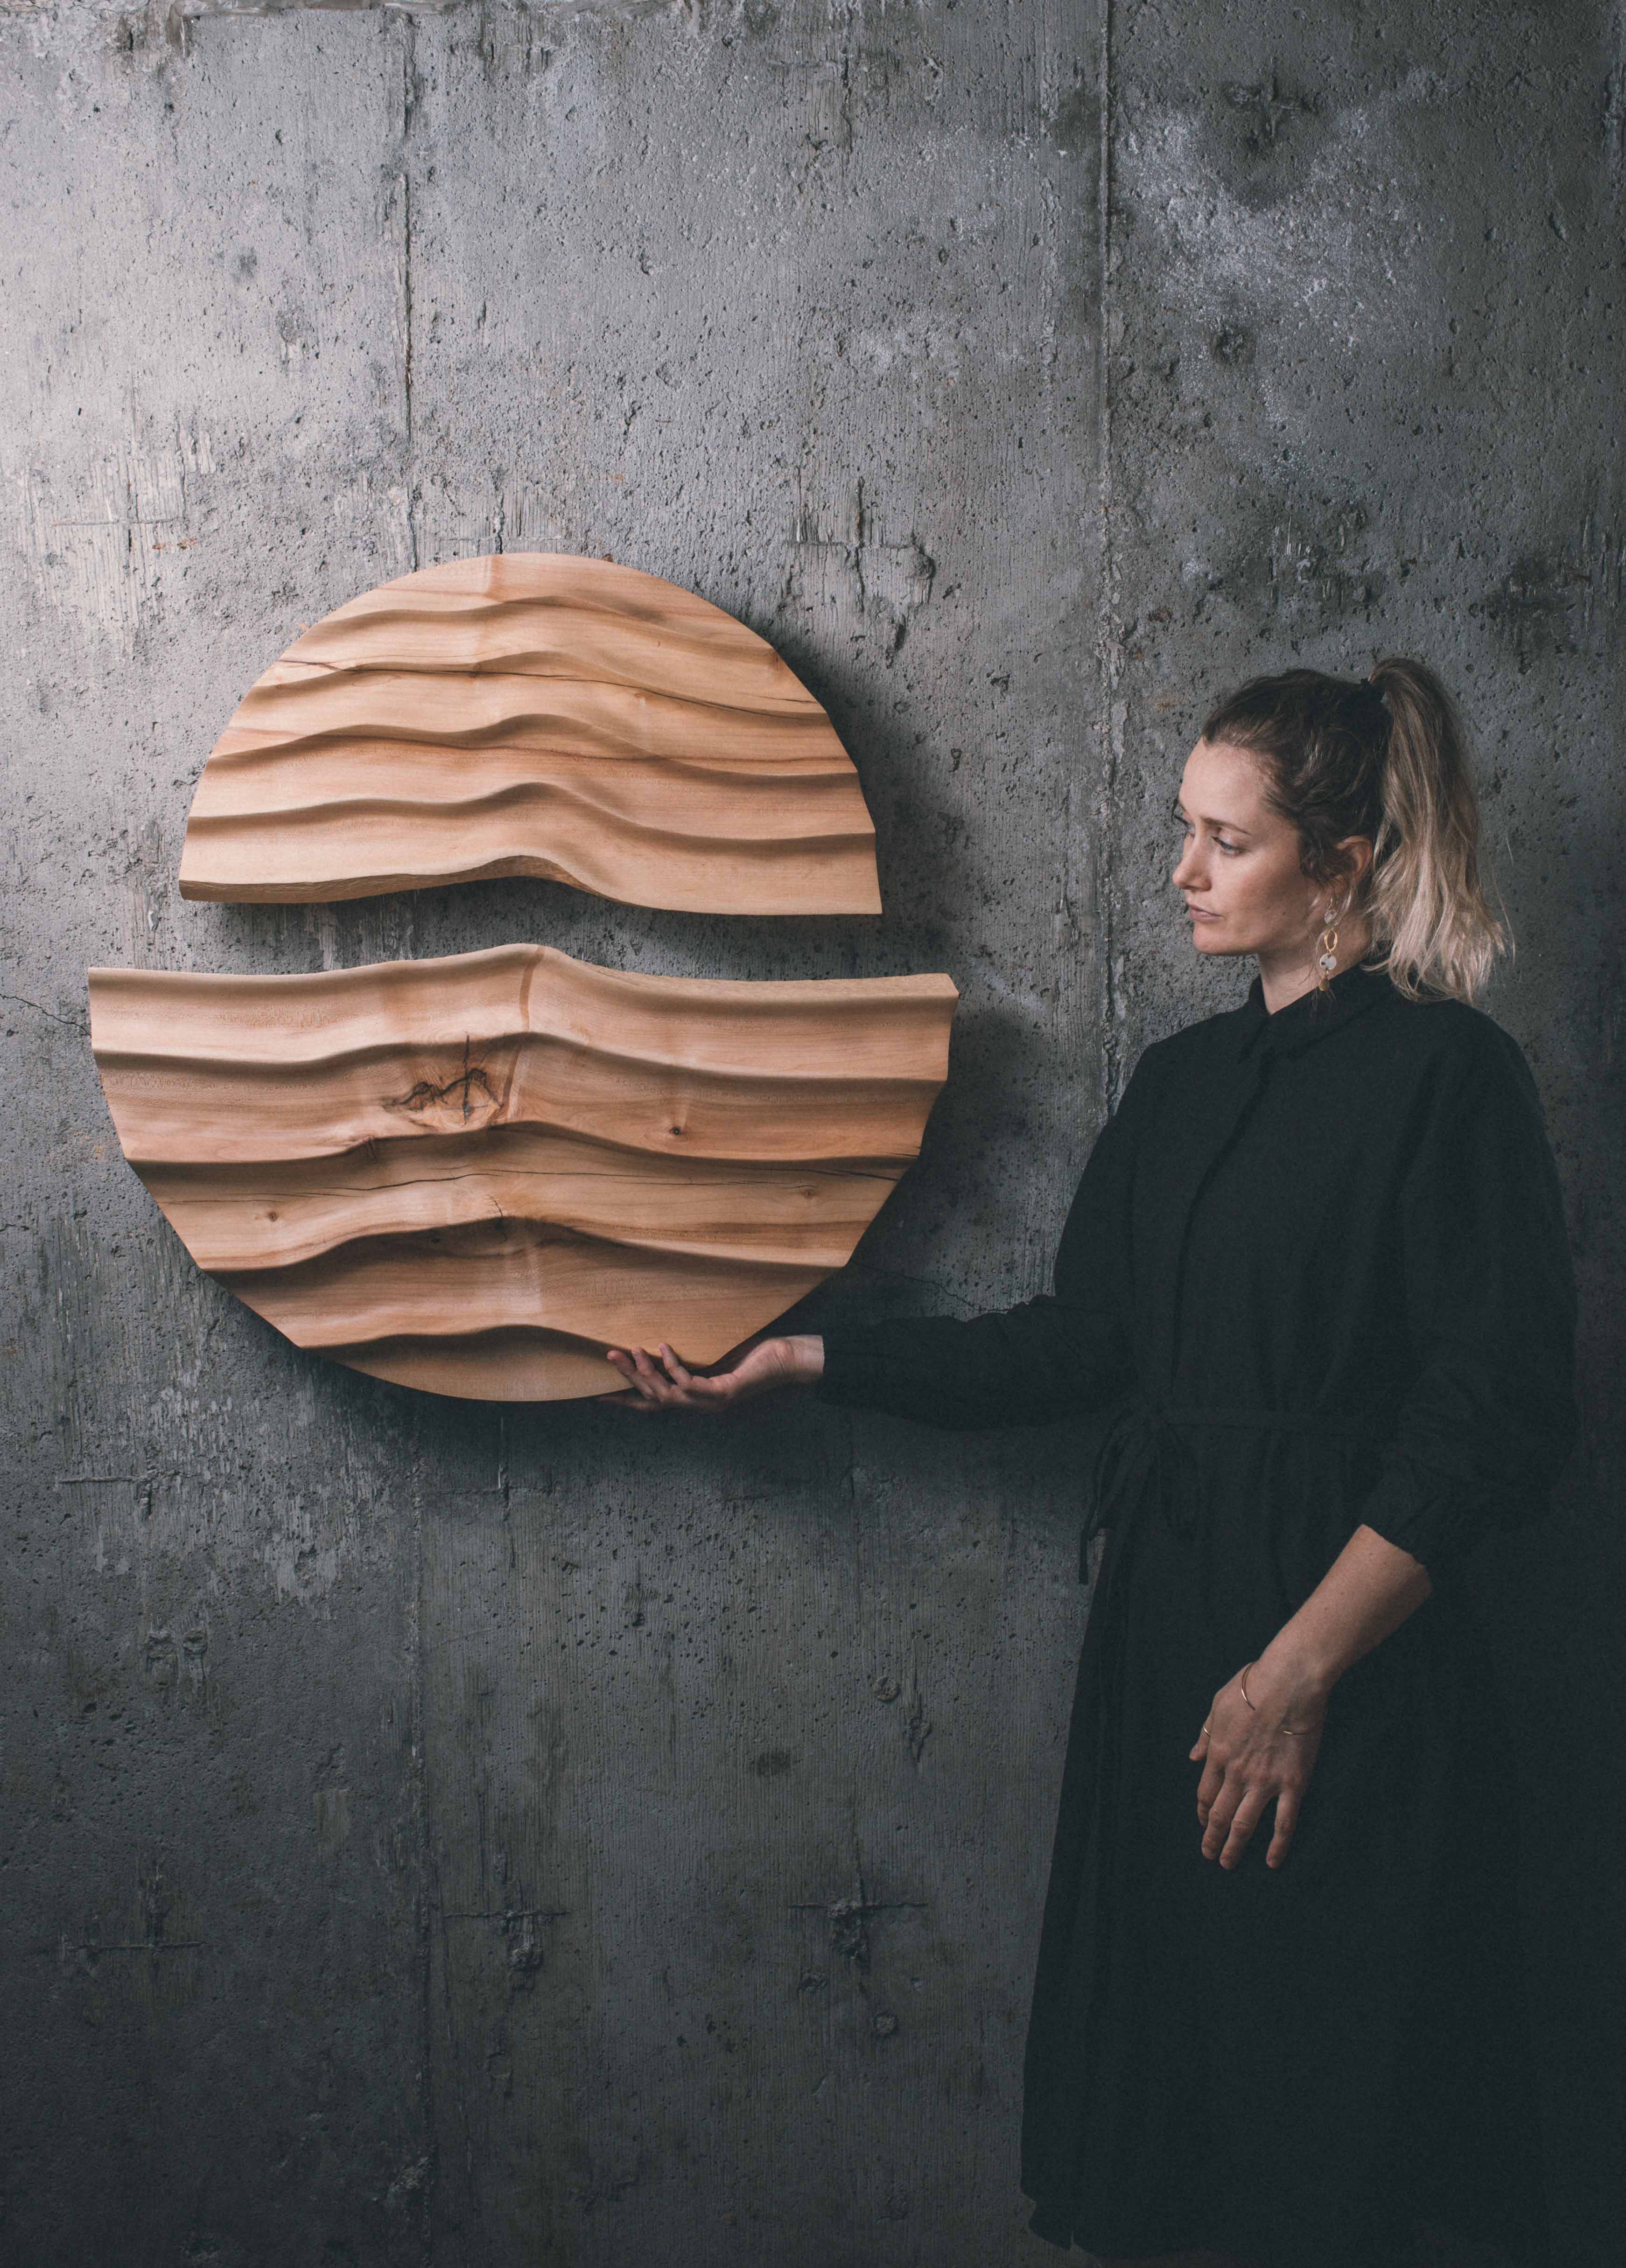 Two-piece natural wood wall decor made by artist and designer, Jak. Natural Designs